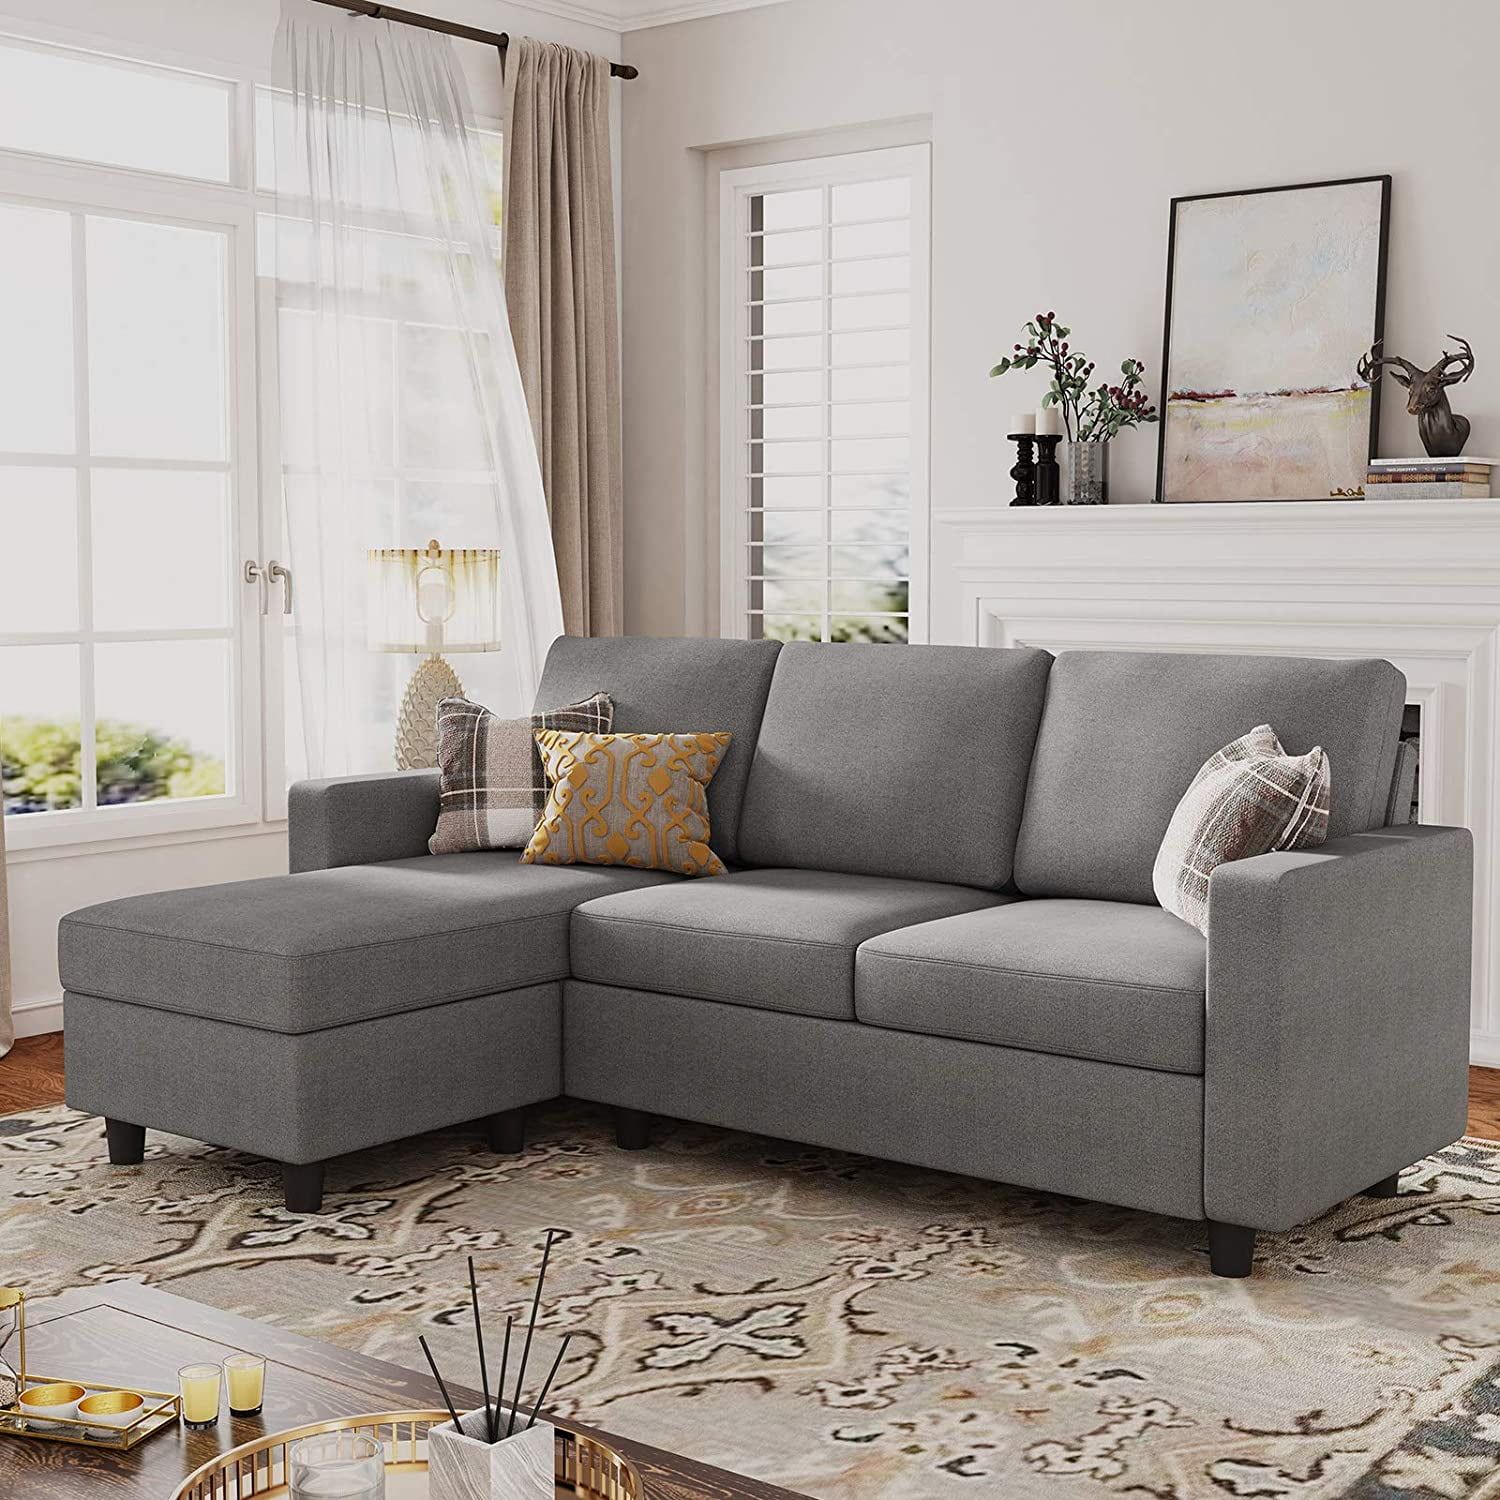 Honbay Dryades L Shaped Sectional Sofa, Gray Fabric – Walmart With Regard To Gray Linen Sofas (View 6 of 15)